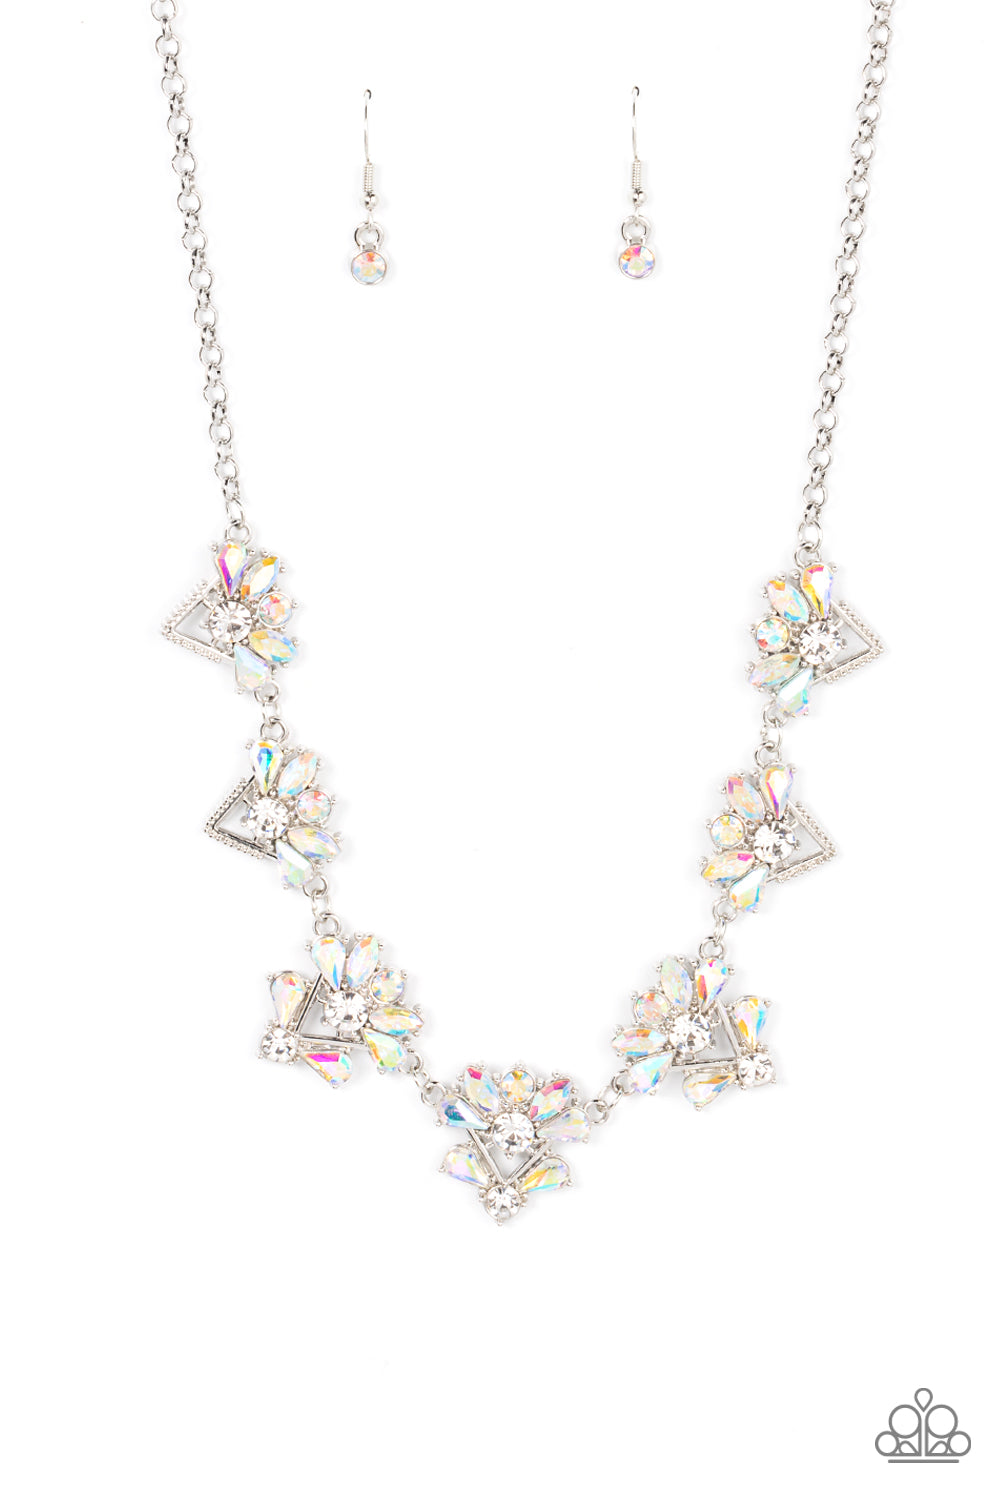 Extragalactic Extravagance - Multi Necklace - Paparazzi - Dare2bdazzlin N Jewelry